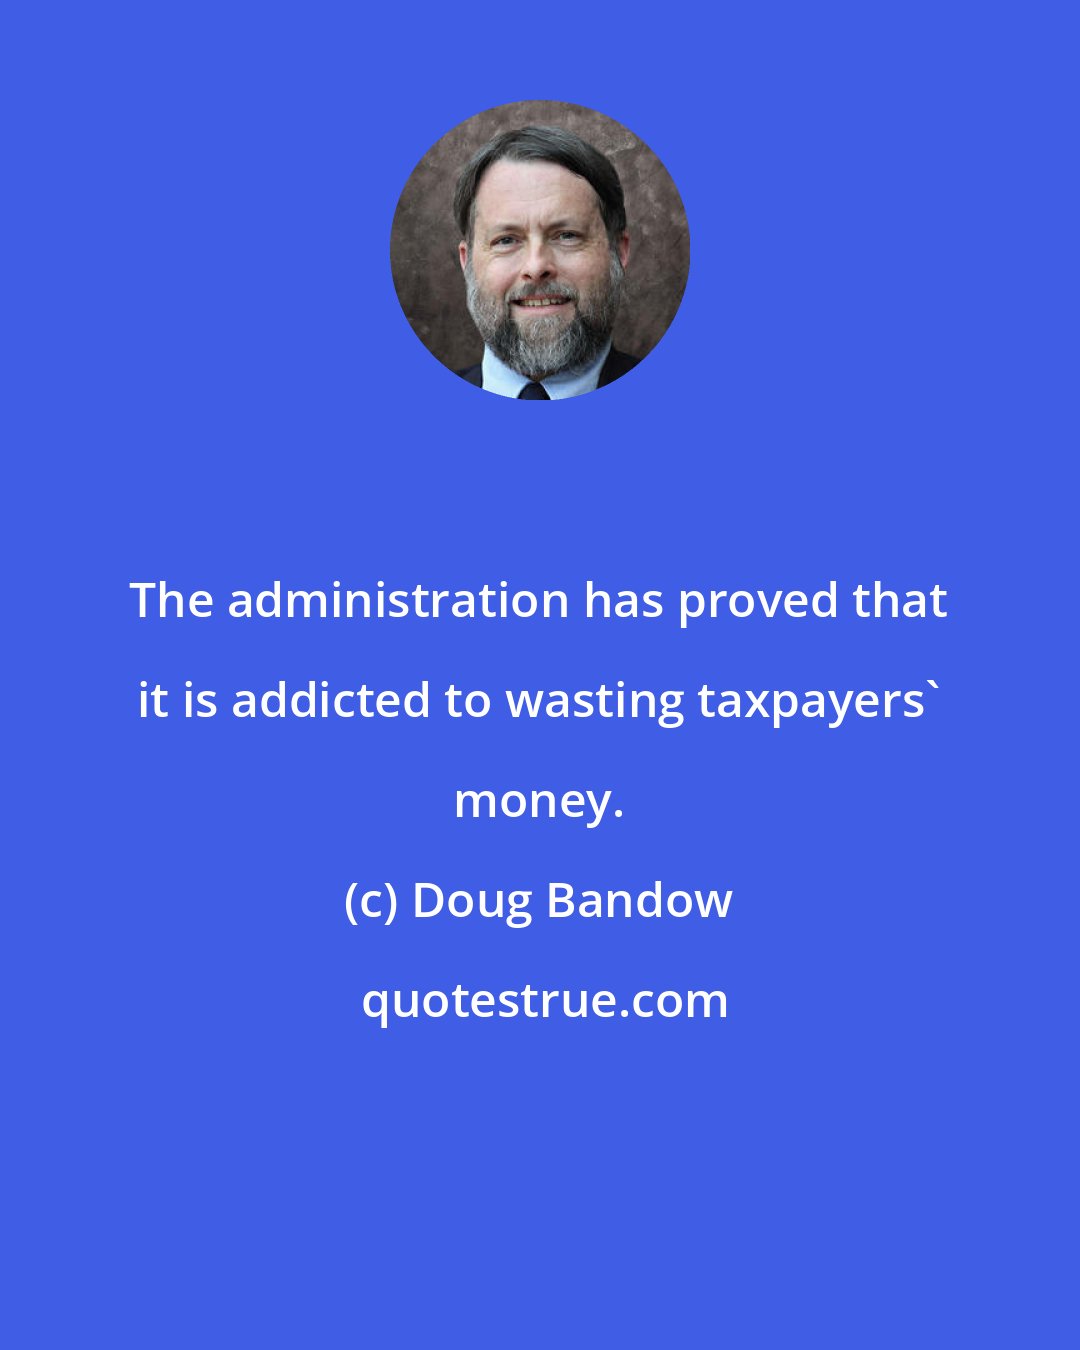 Doug Bandow: The administration has proved that it is addicted to wasting taxpayers' money.